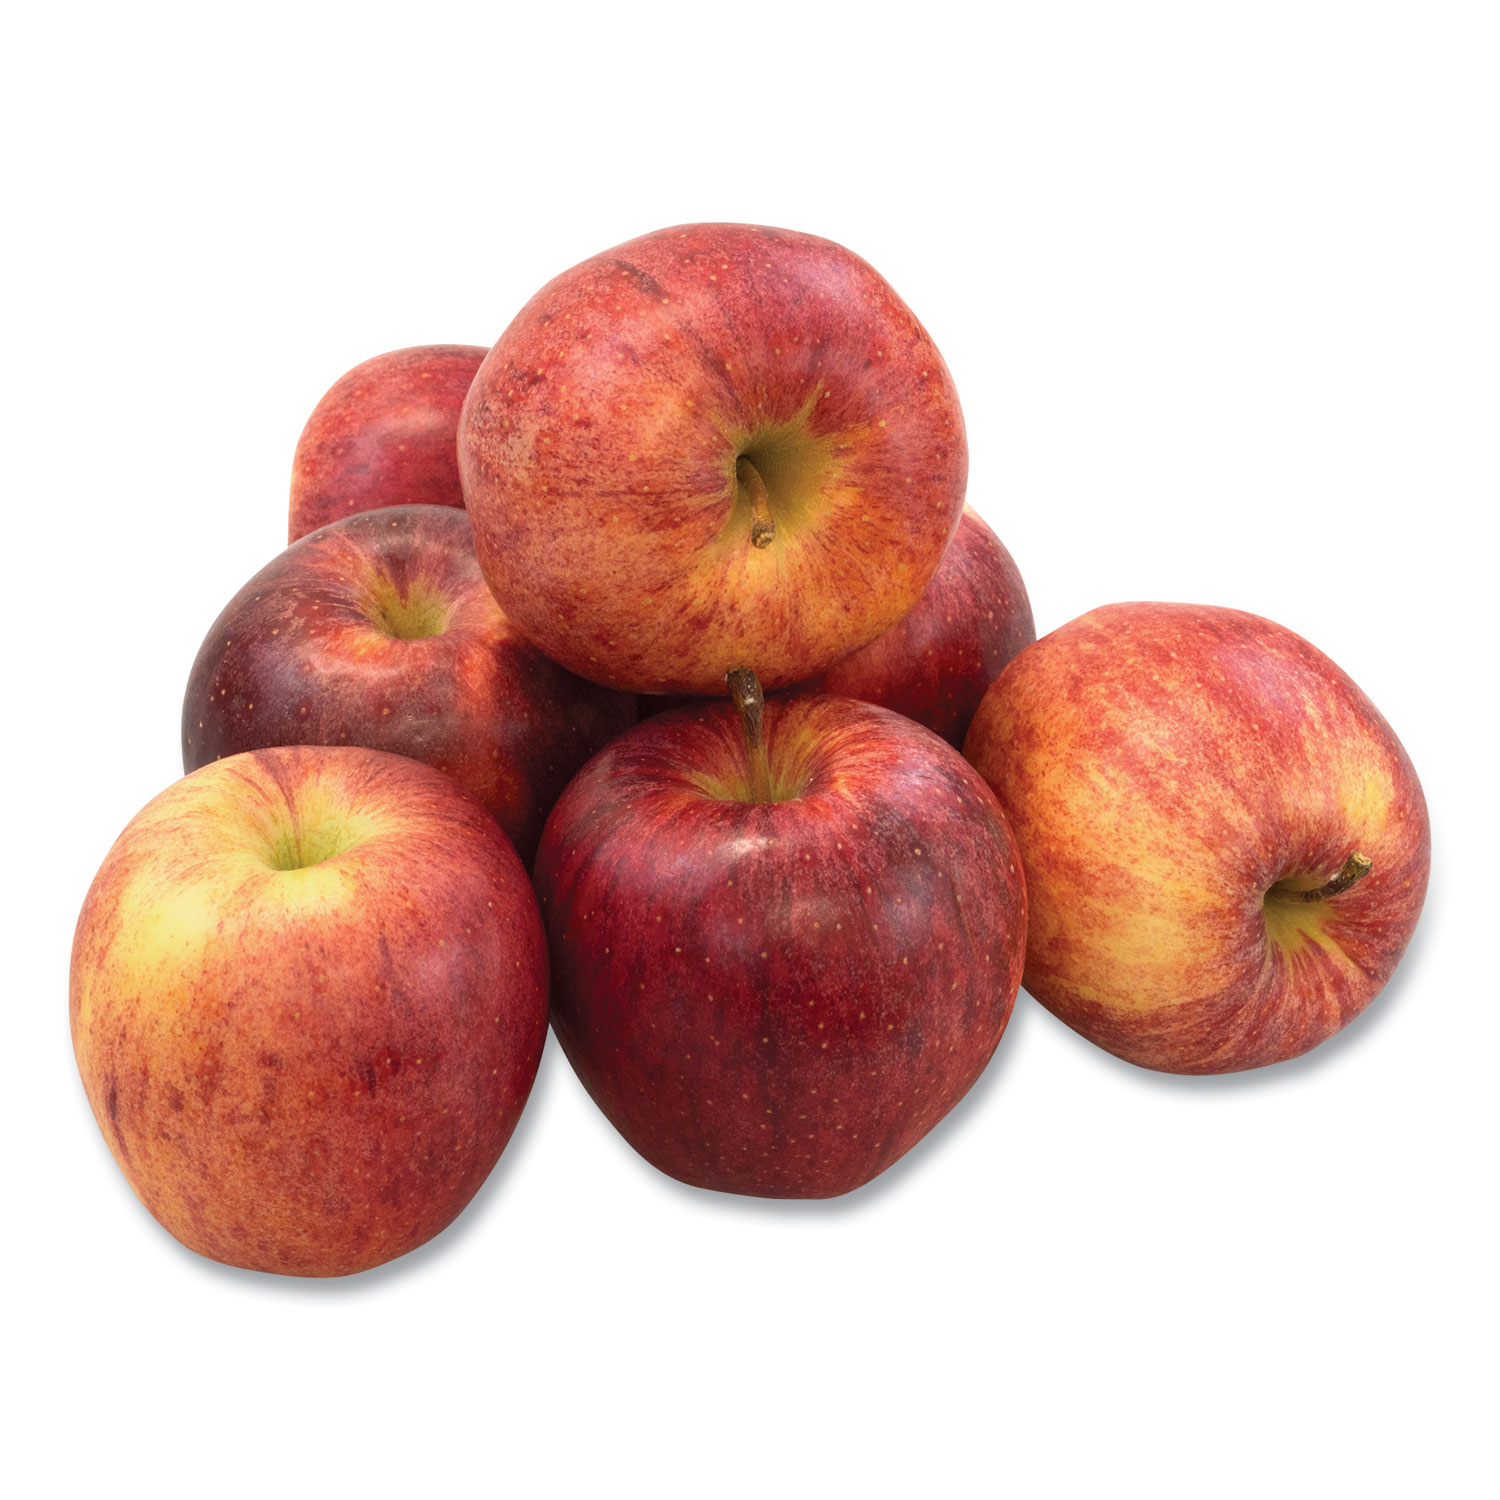  National Brand 688679 Fresh Gala Apples, 8/Pack, Free Delivery in 1-4 Business Days (GRR90000032) 